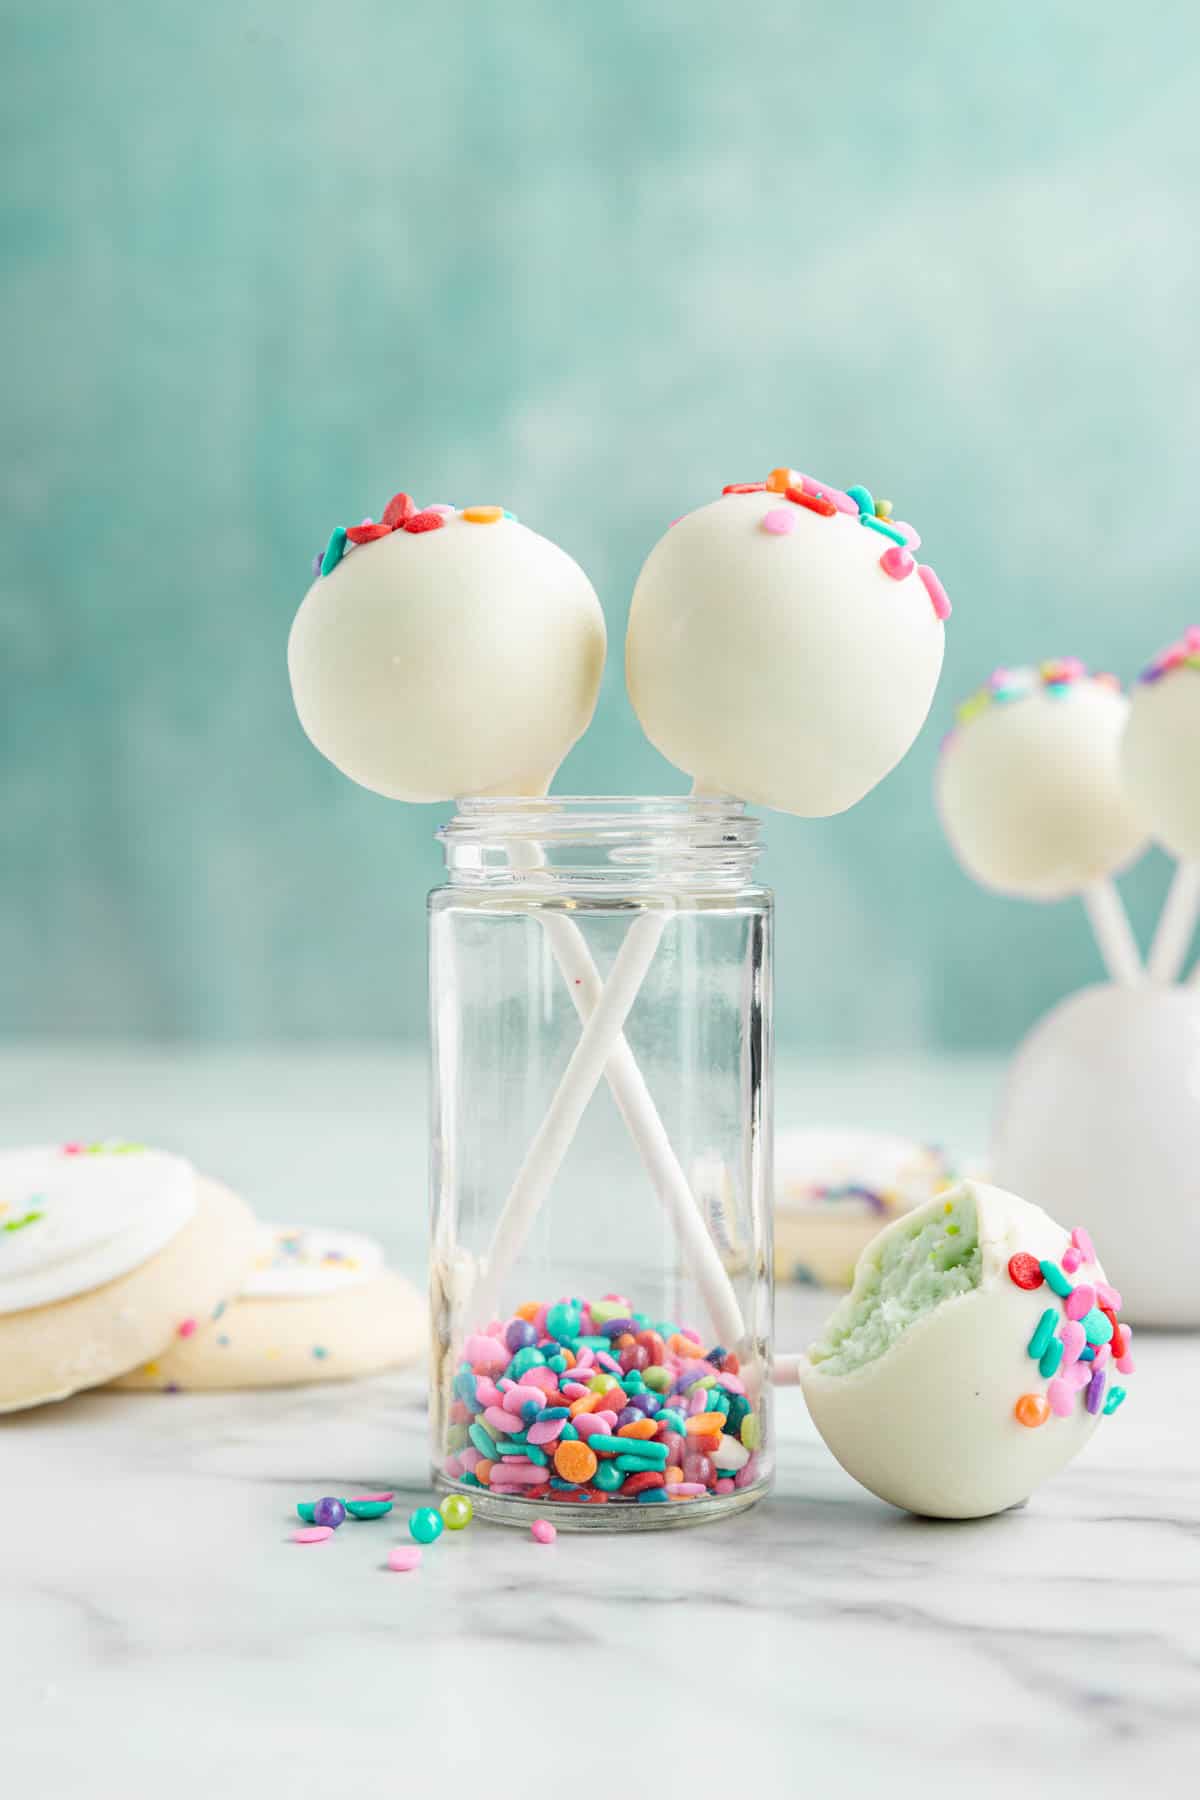 Lofthouse cookie cake pops covered in white chocolate in front of a blue background.